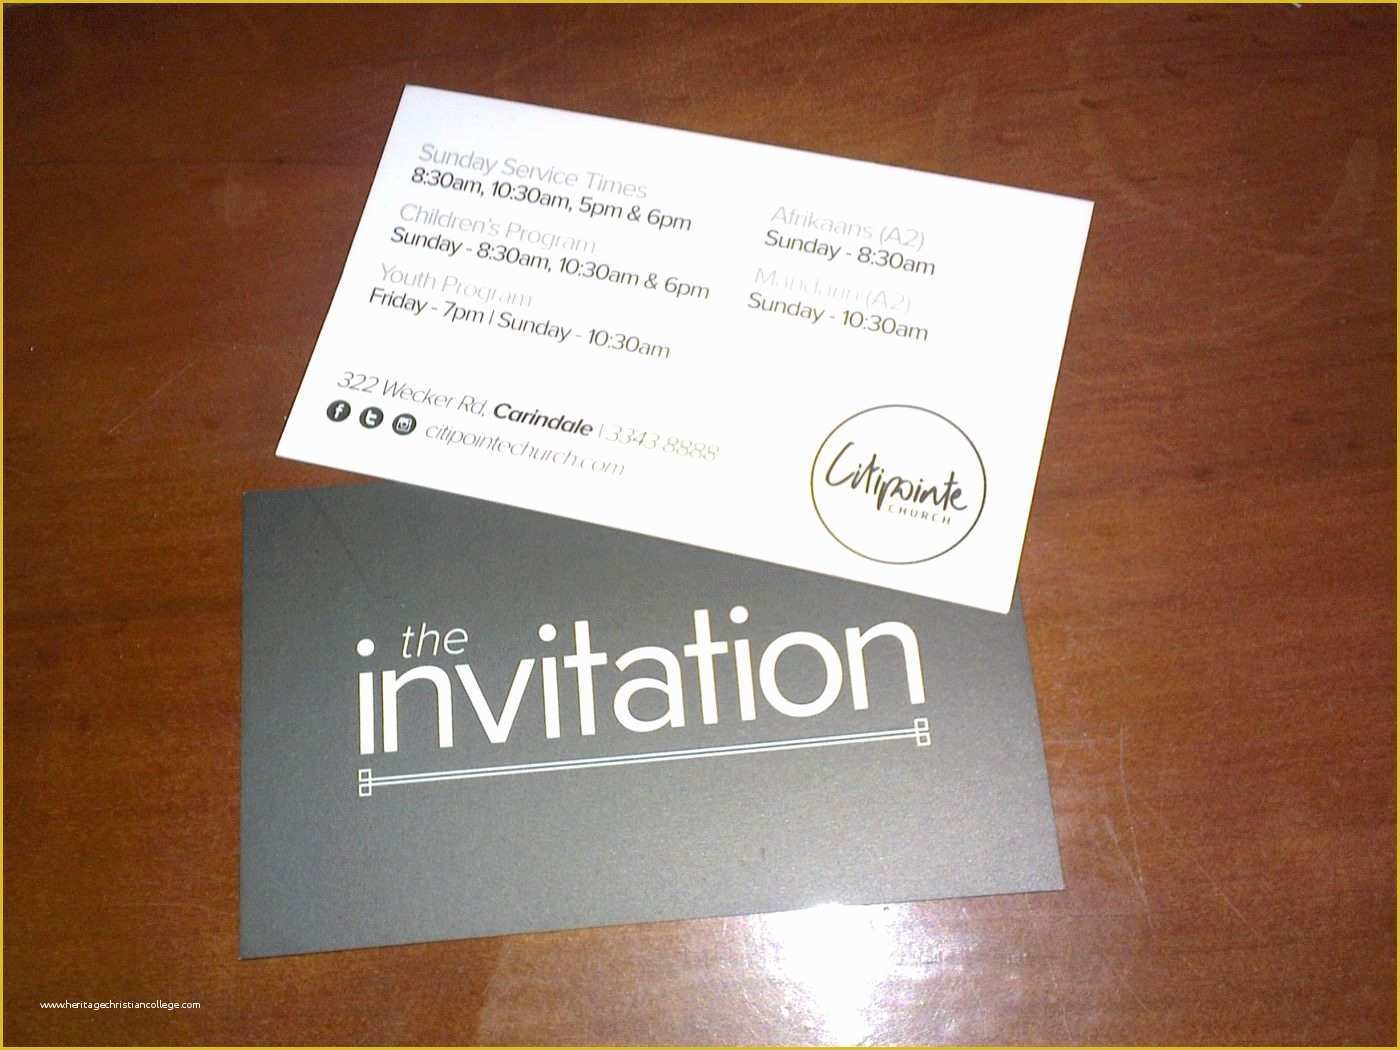 Christian Business Cards Templates Free Of Sample Church Invitation Flyers Free Certificate